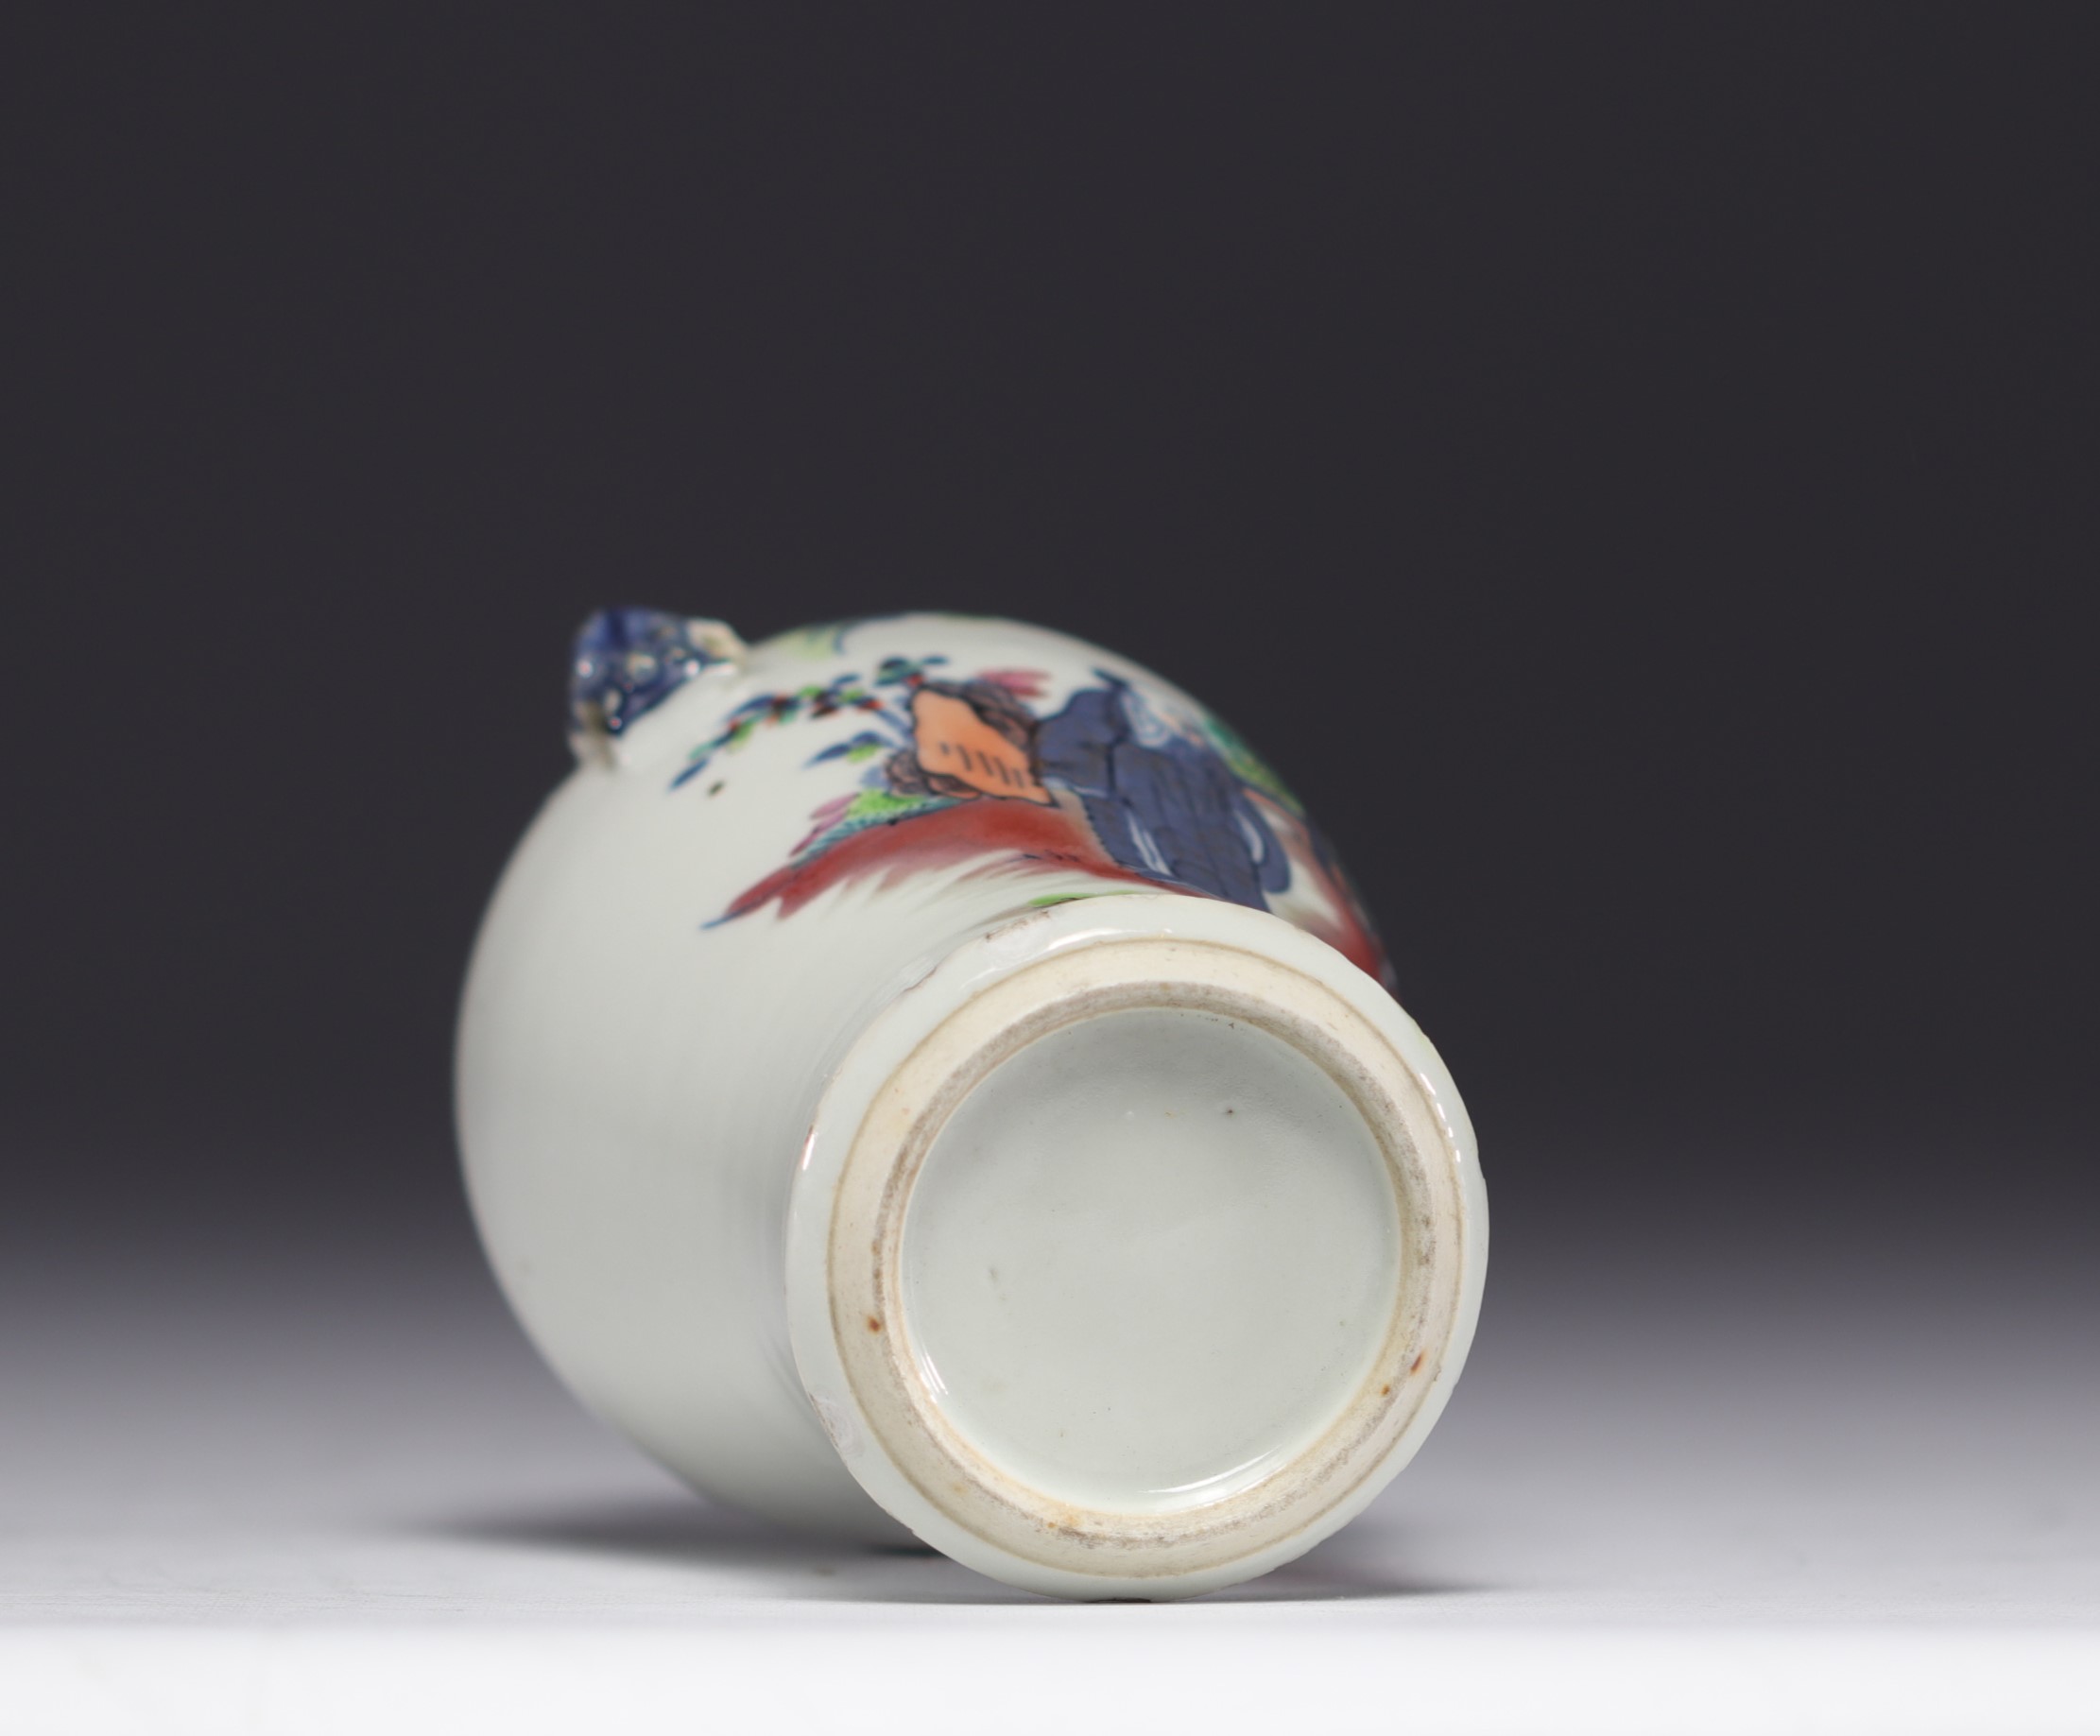 Chinese porcelain vase decorated with "Doucai" figures - Image 5 of 6